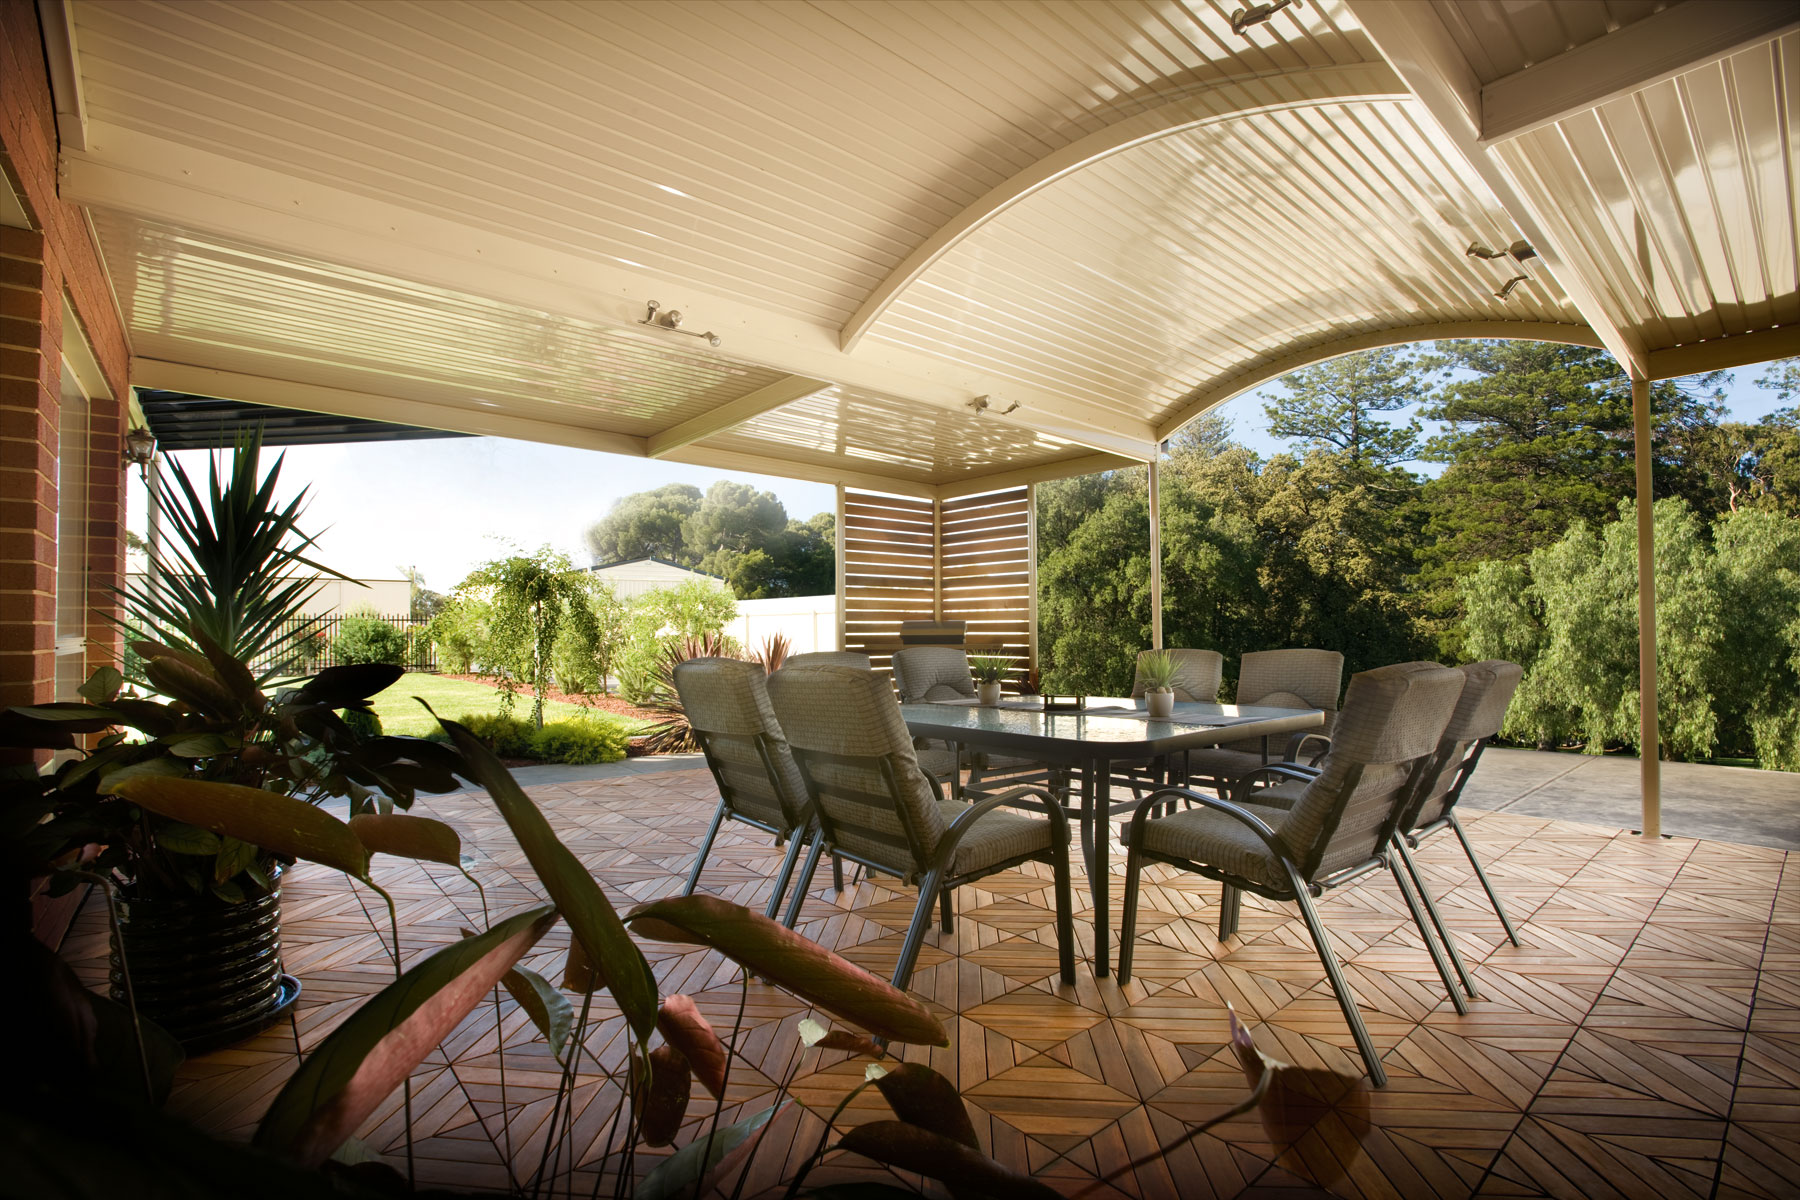 Patio with curved roofs - Stratco Outback Curved Roof Patio